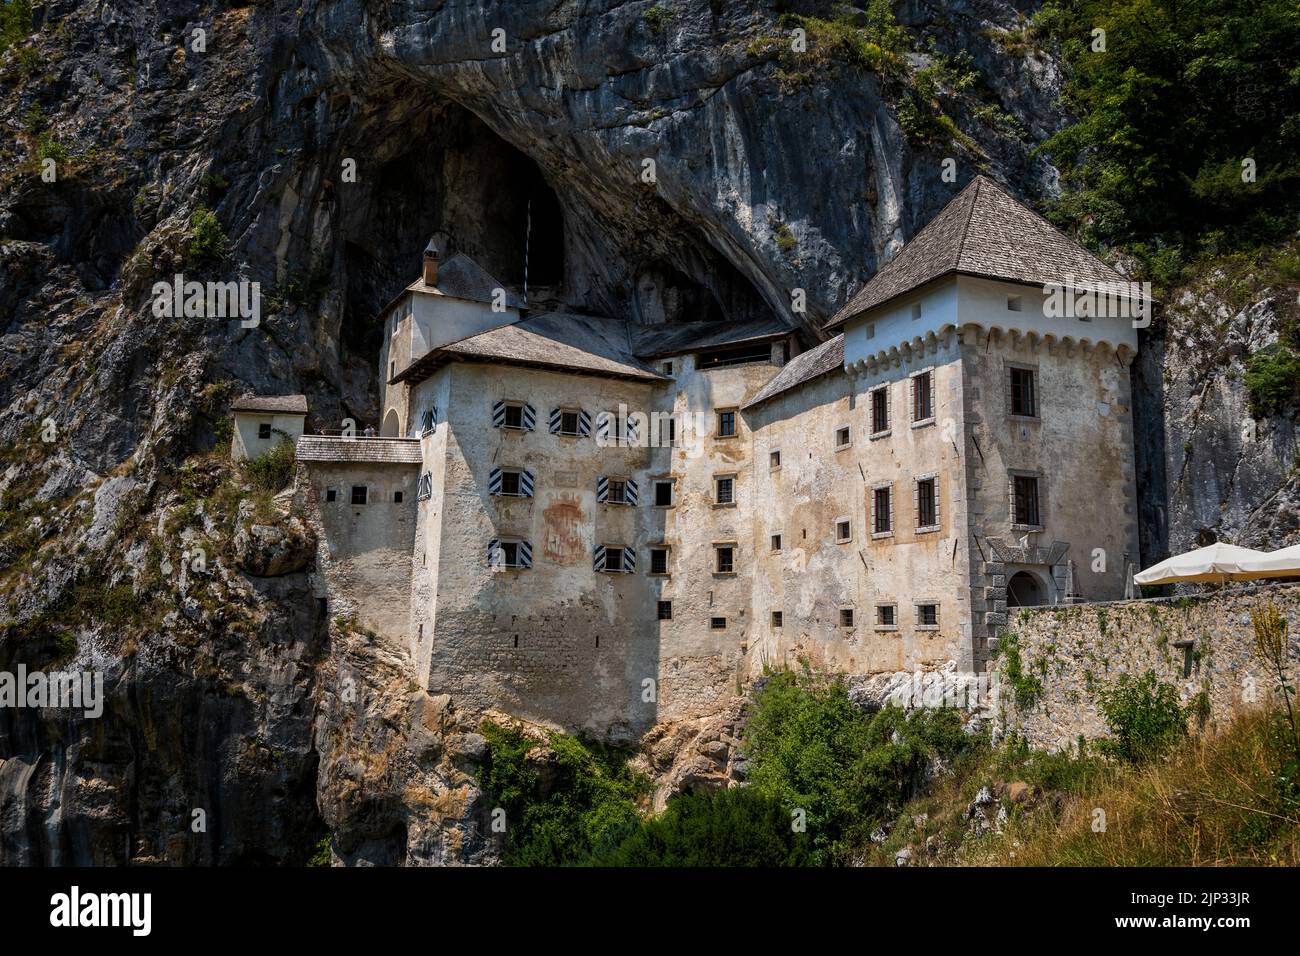 The Predjama Castle in Slovenia. Medieval cave castle in cliff with network of secret tunnels. Stock Photo